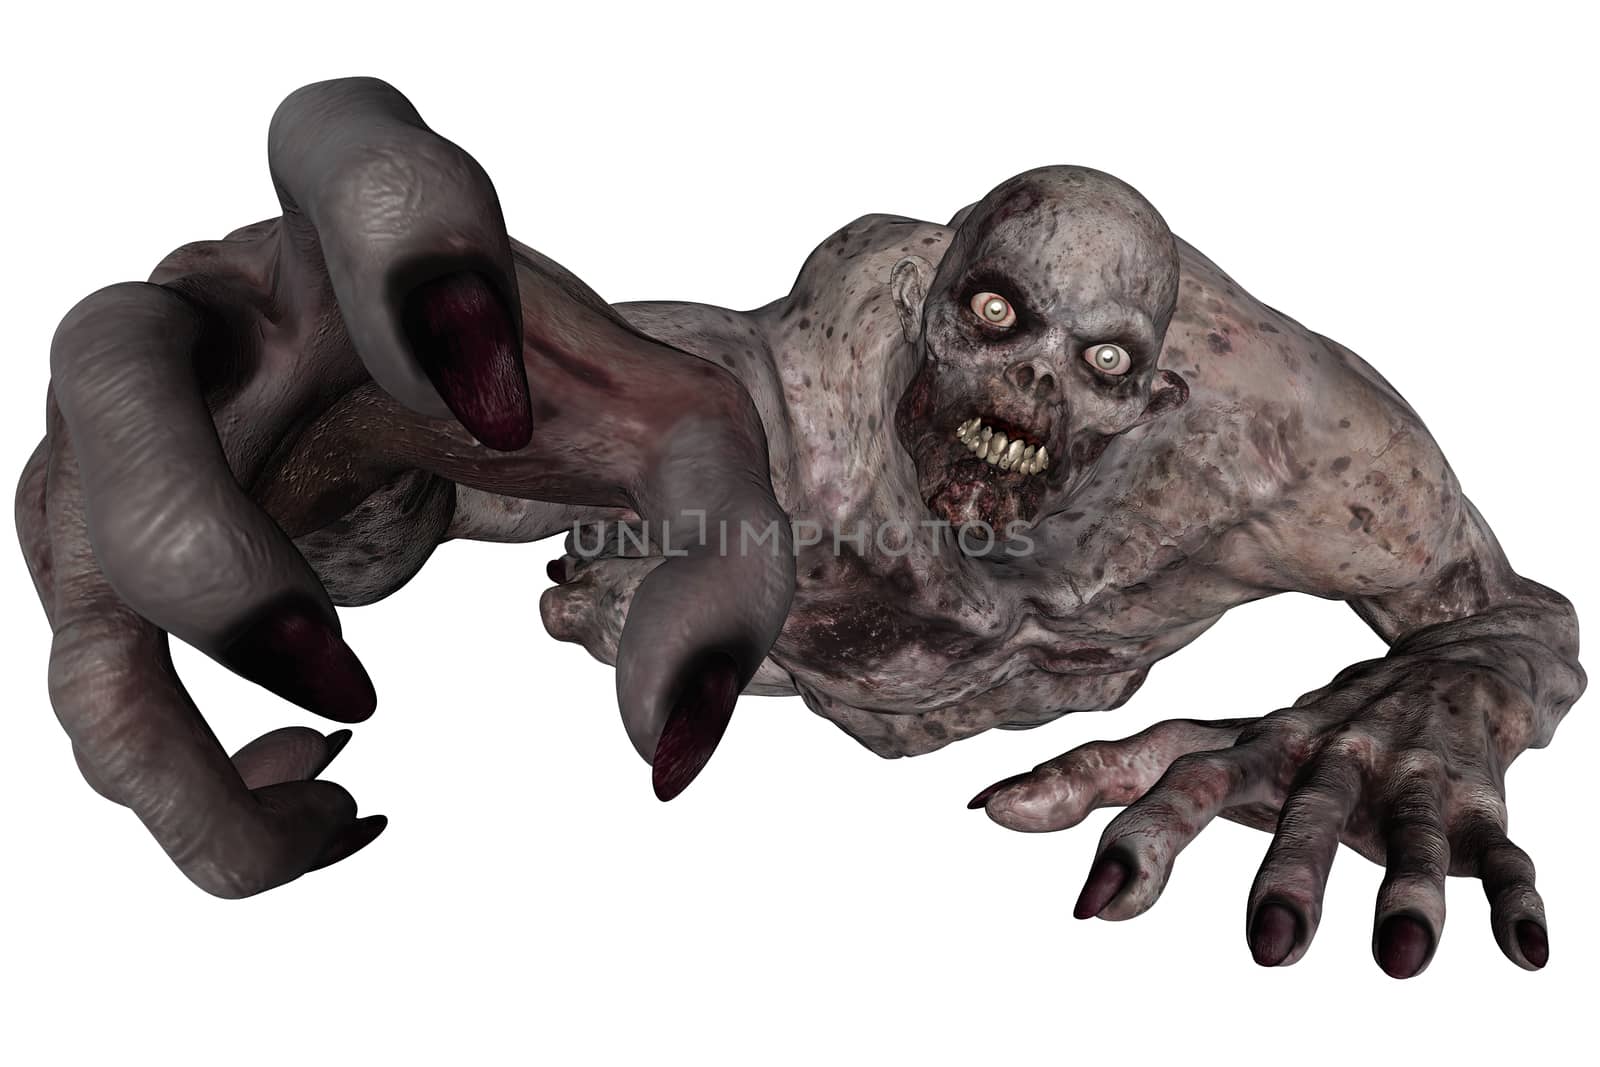 3D rendered illustration of undead creature on white background isloated